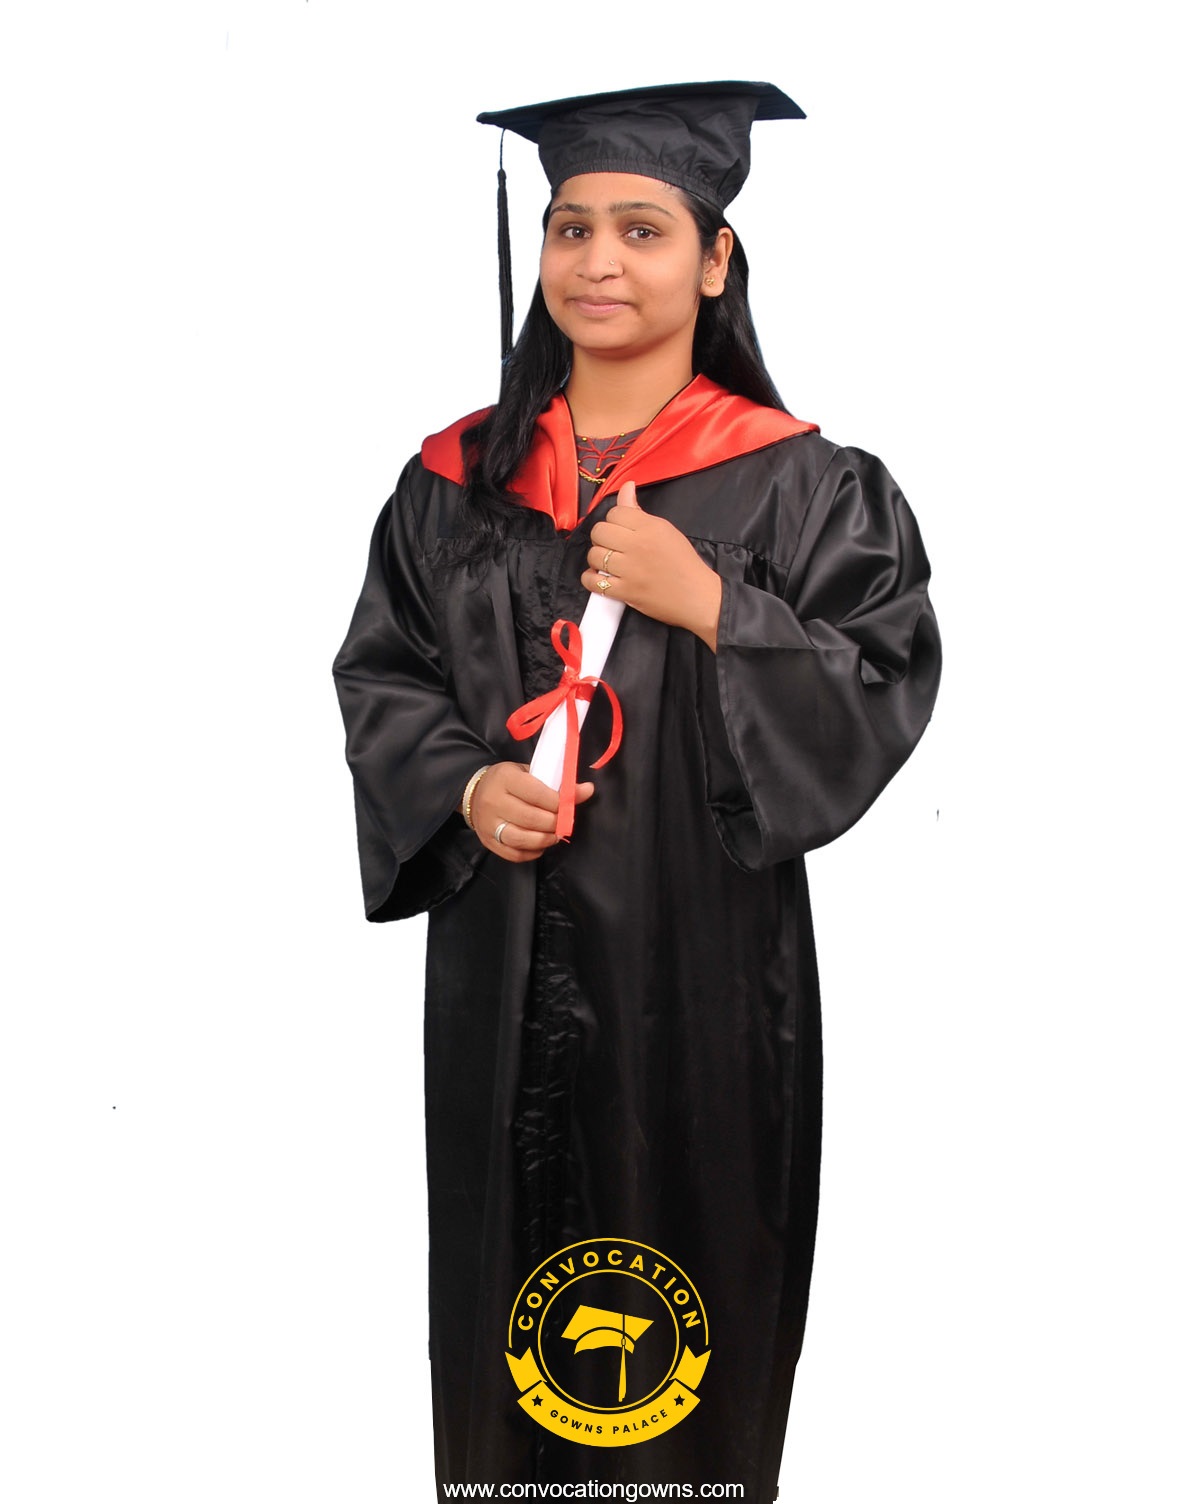 Satin Hire Black Shiny Graduation Gown and Cap at Rs 140/piece in Mumbai |  ID: 22288687497